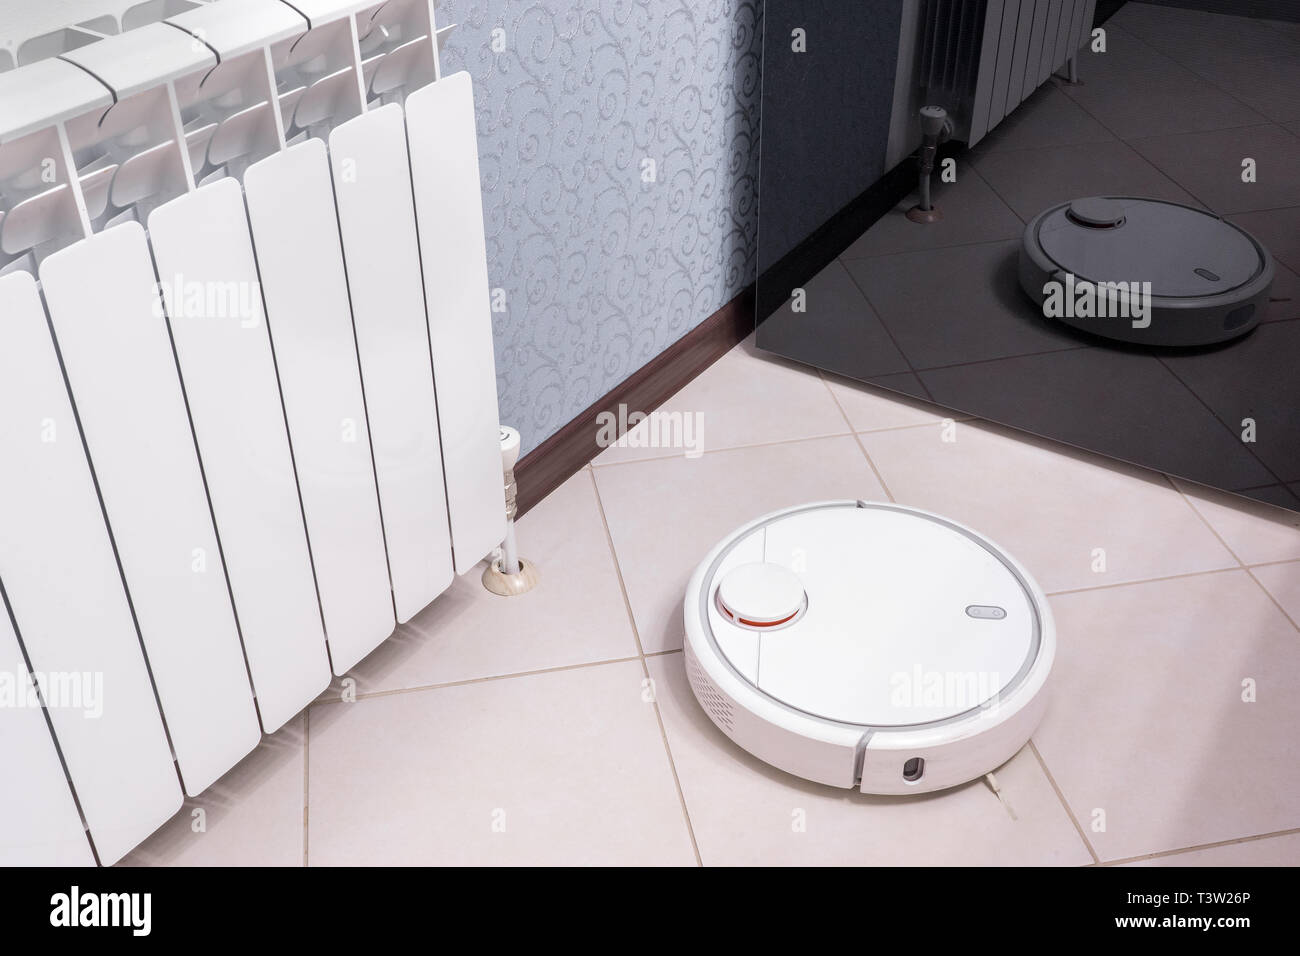 Robotic vacuum cleaner on laminate floor is reflected in mirror of fridge, smart home robotics wireless cleaning for simplify routine housework, effic Stock Photo